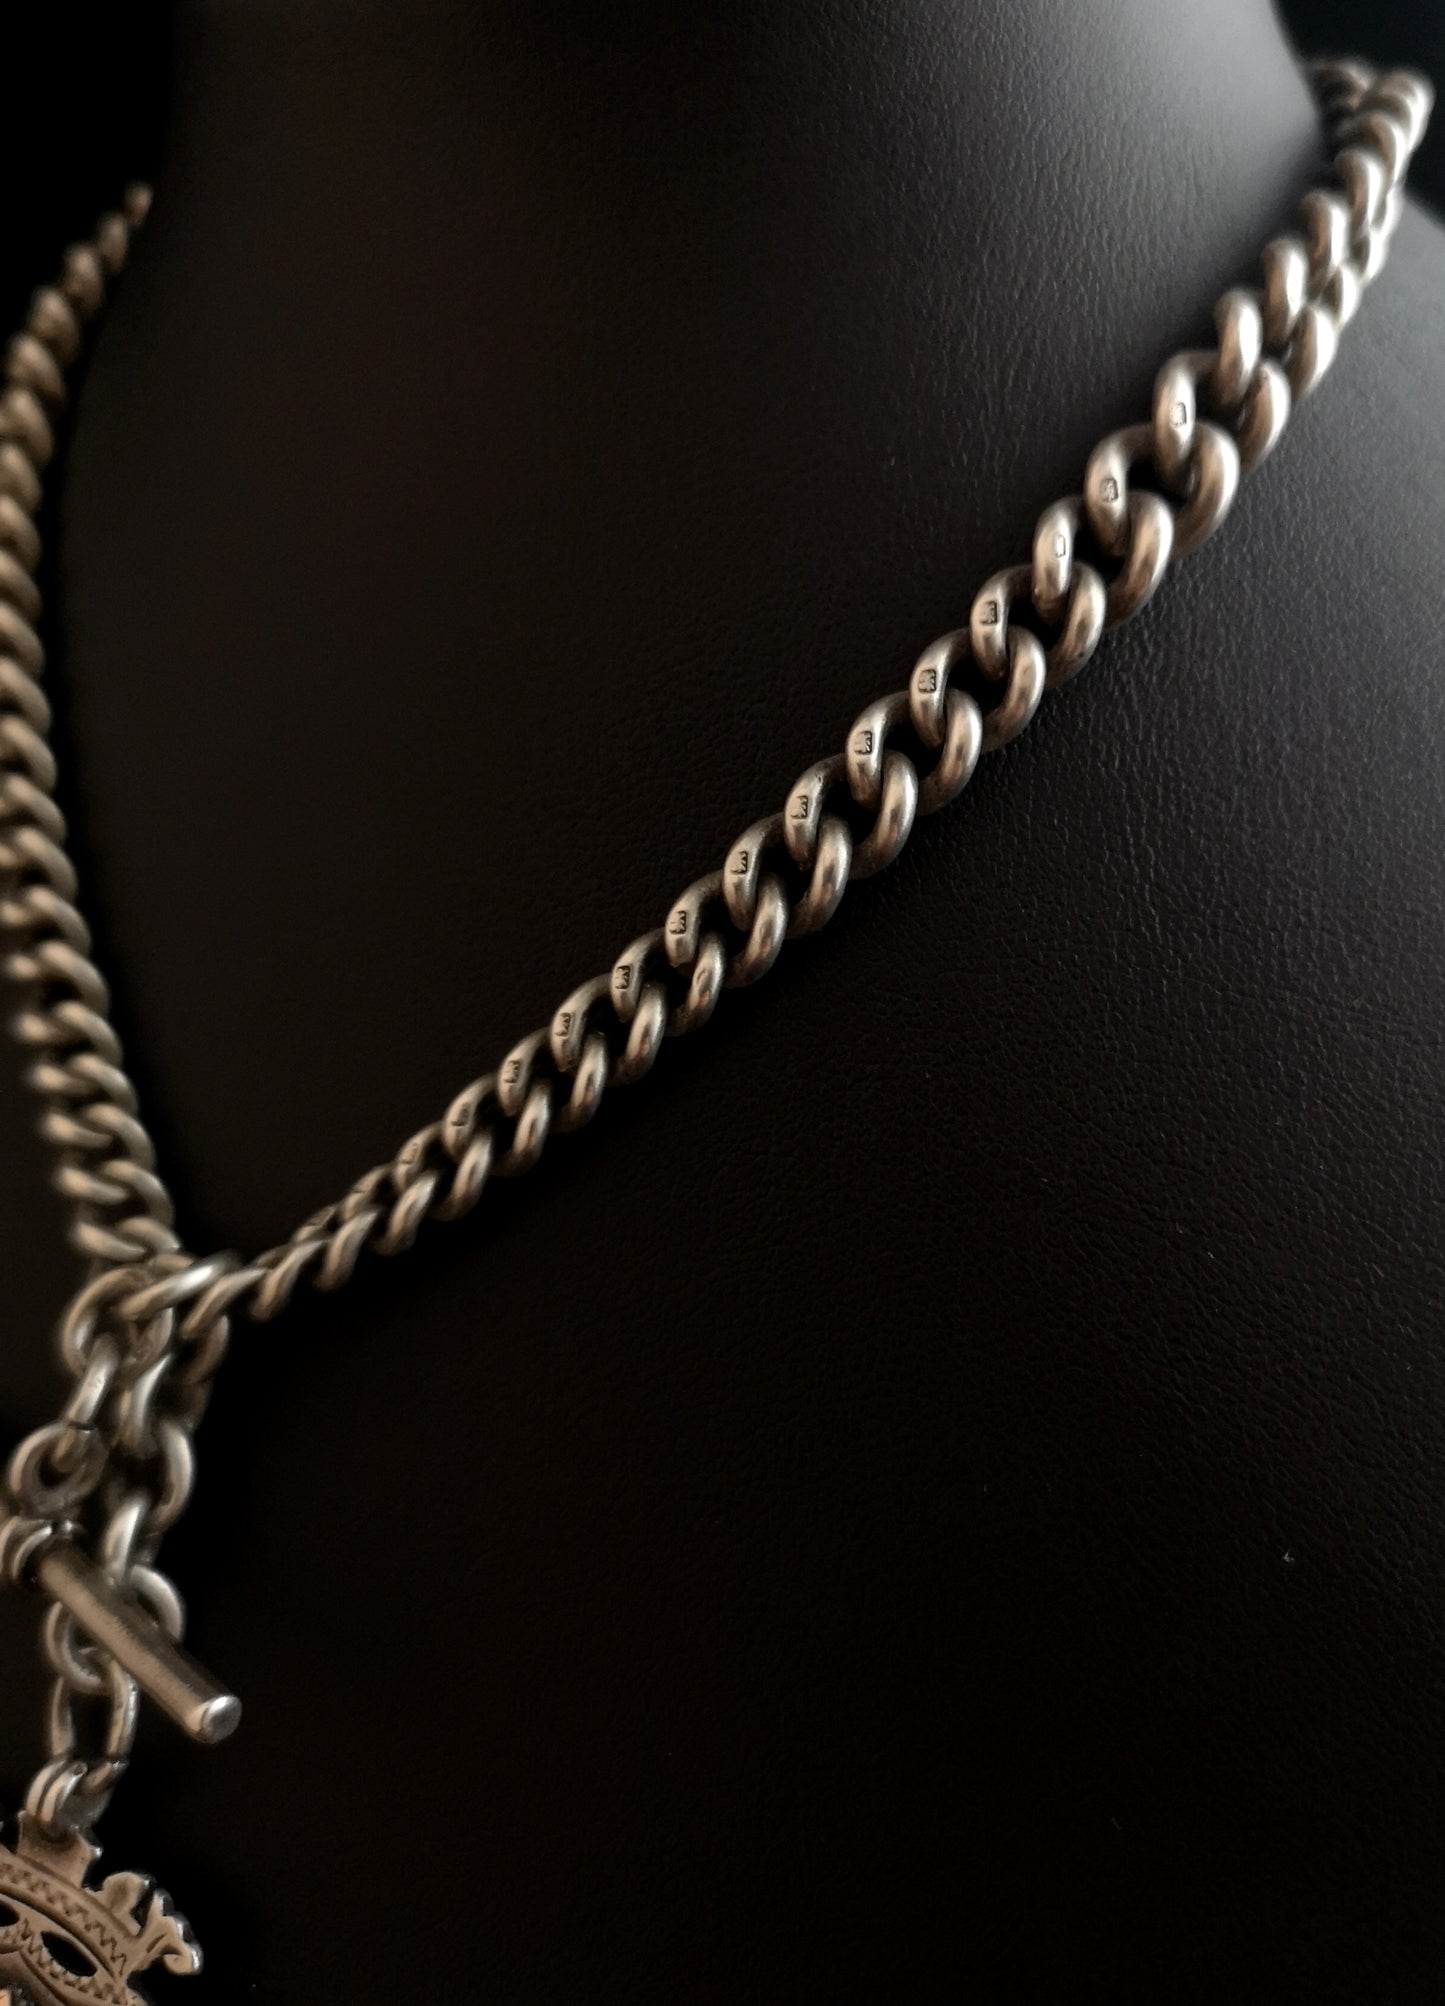 Antique silver Double Albert chain, rose gold fob